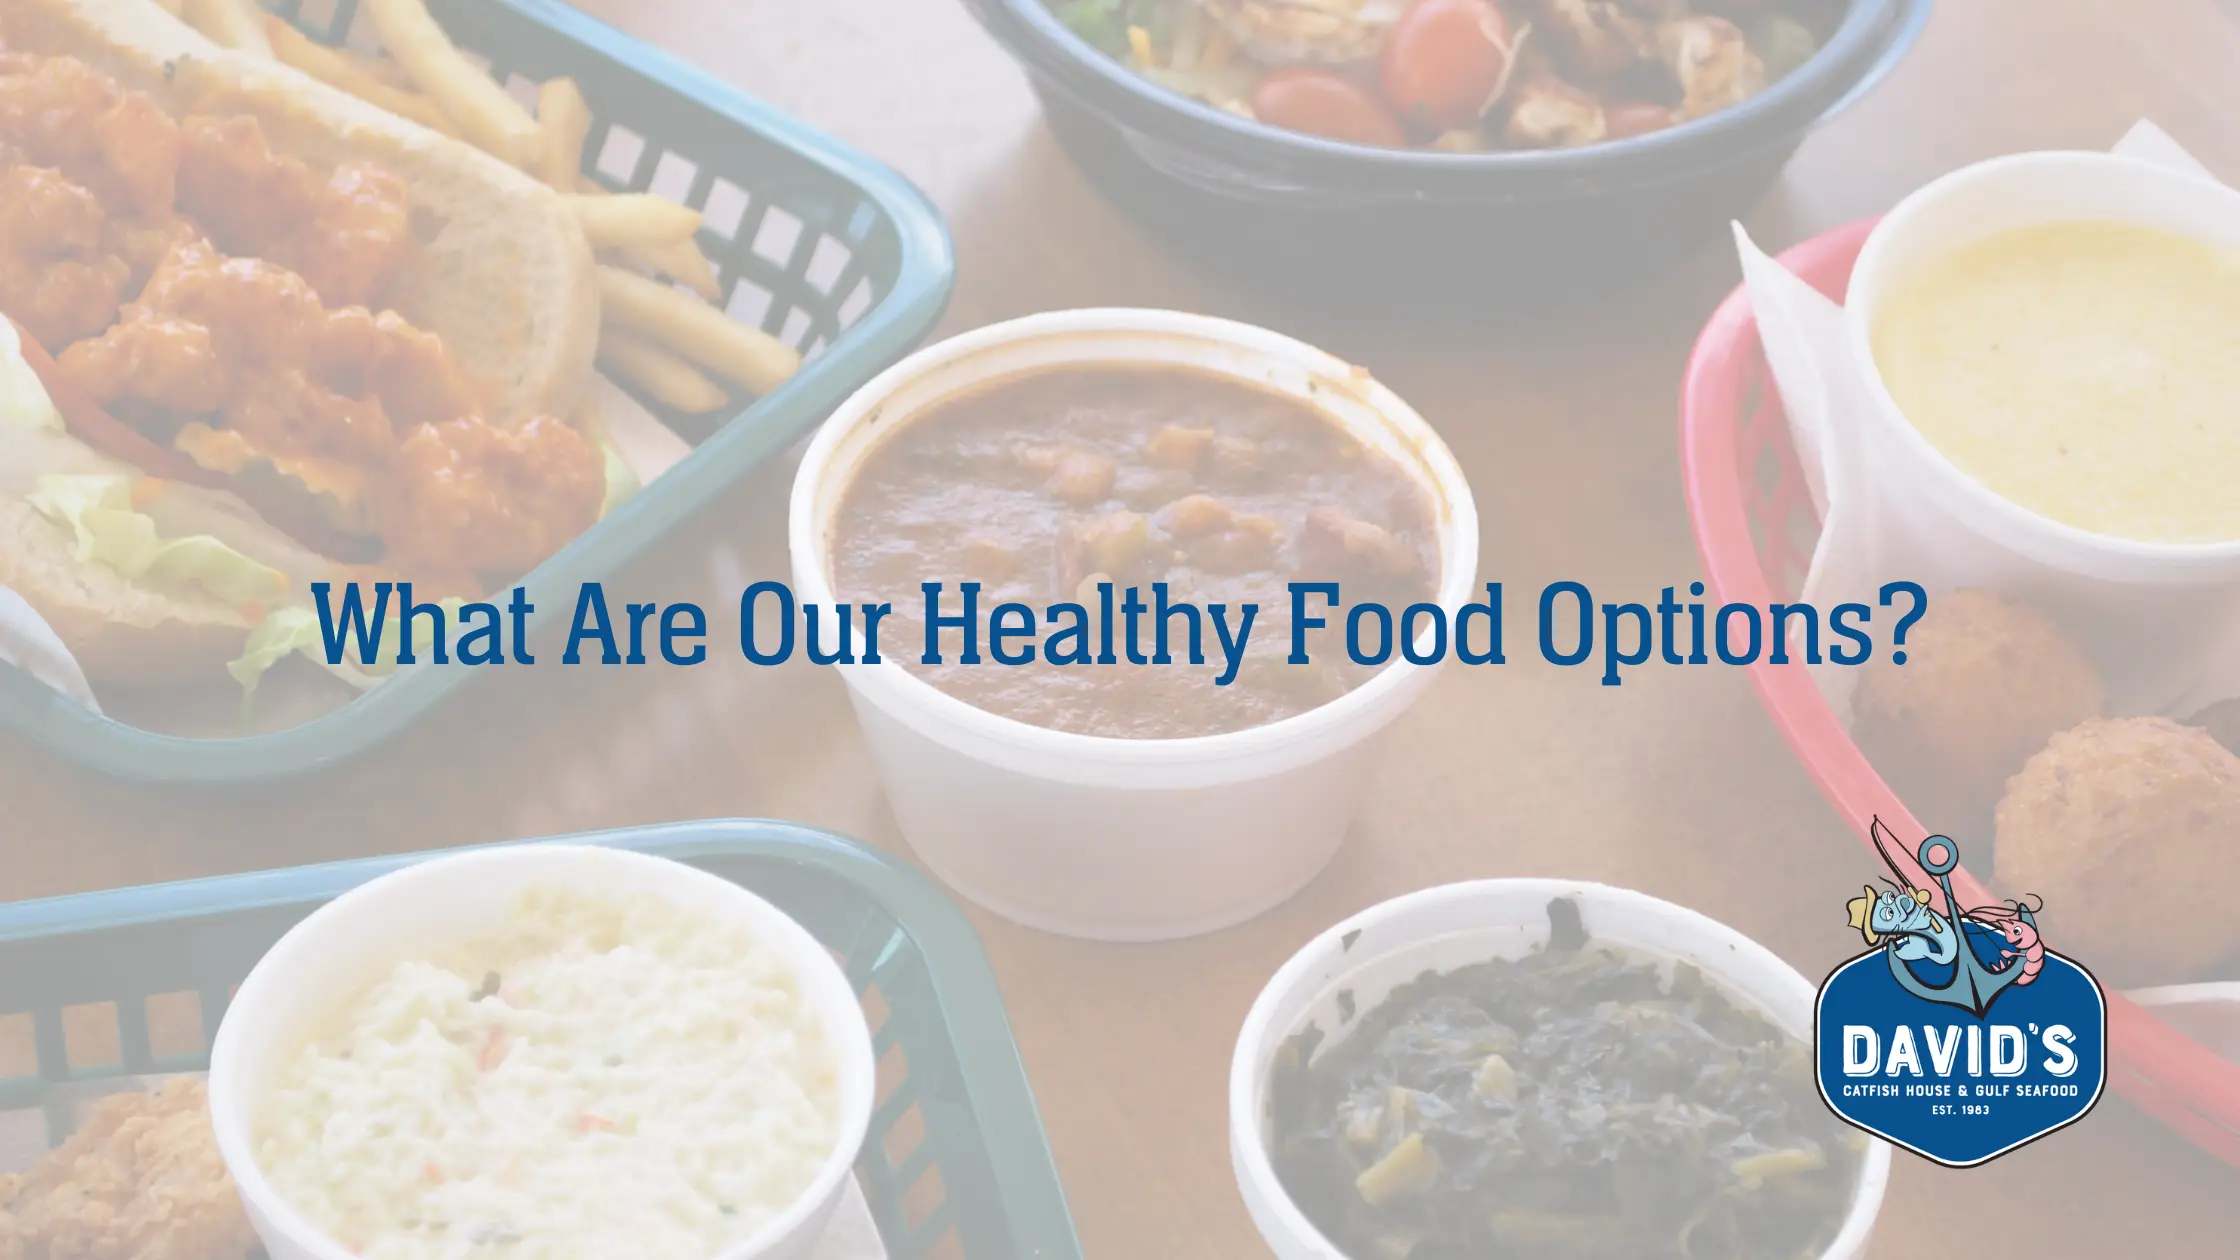 What Are Our Healthy Food Options?